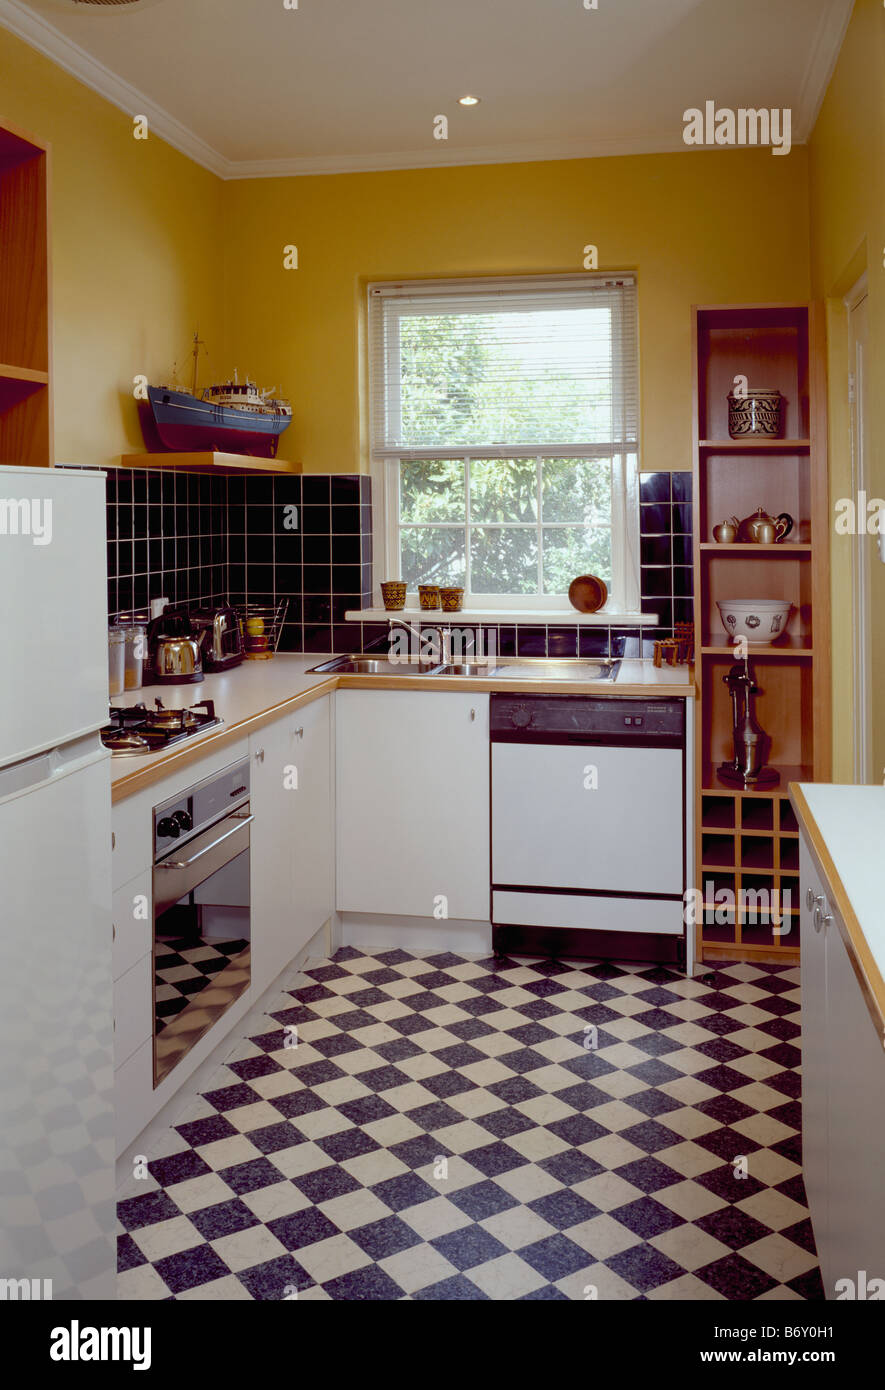 Black White Chequerboard Flooring In Yellow Kitchen With